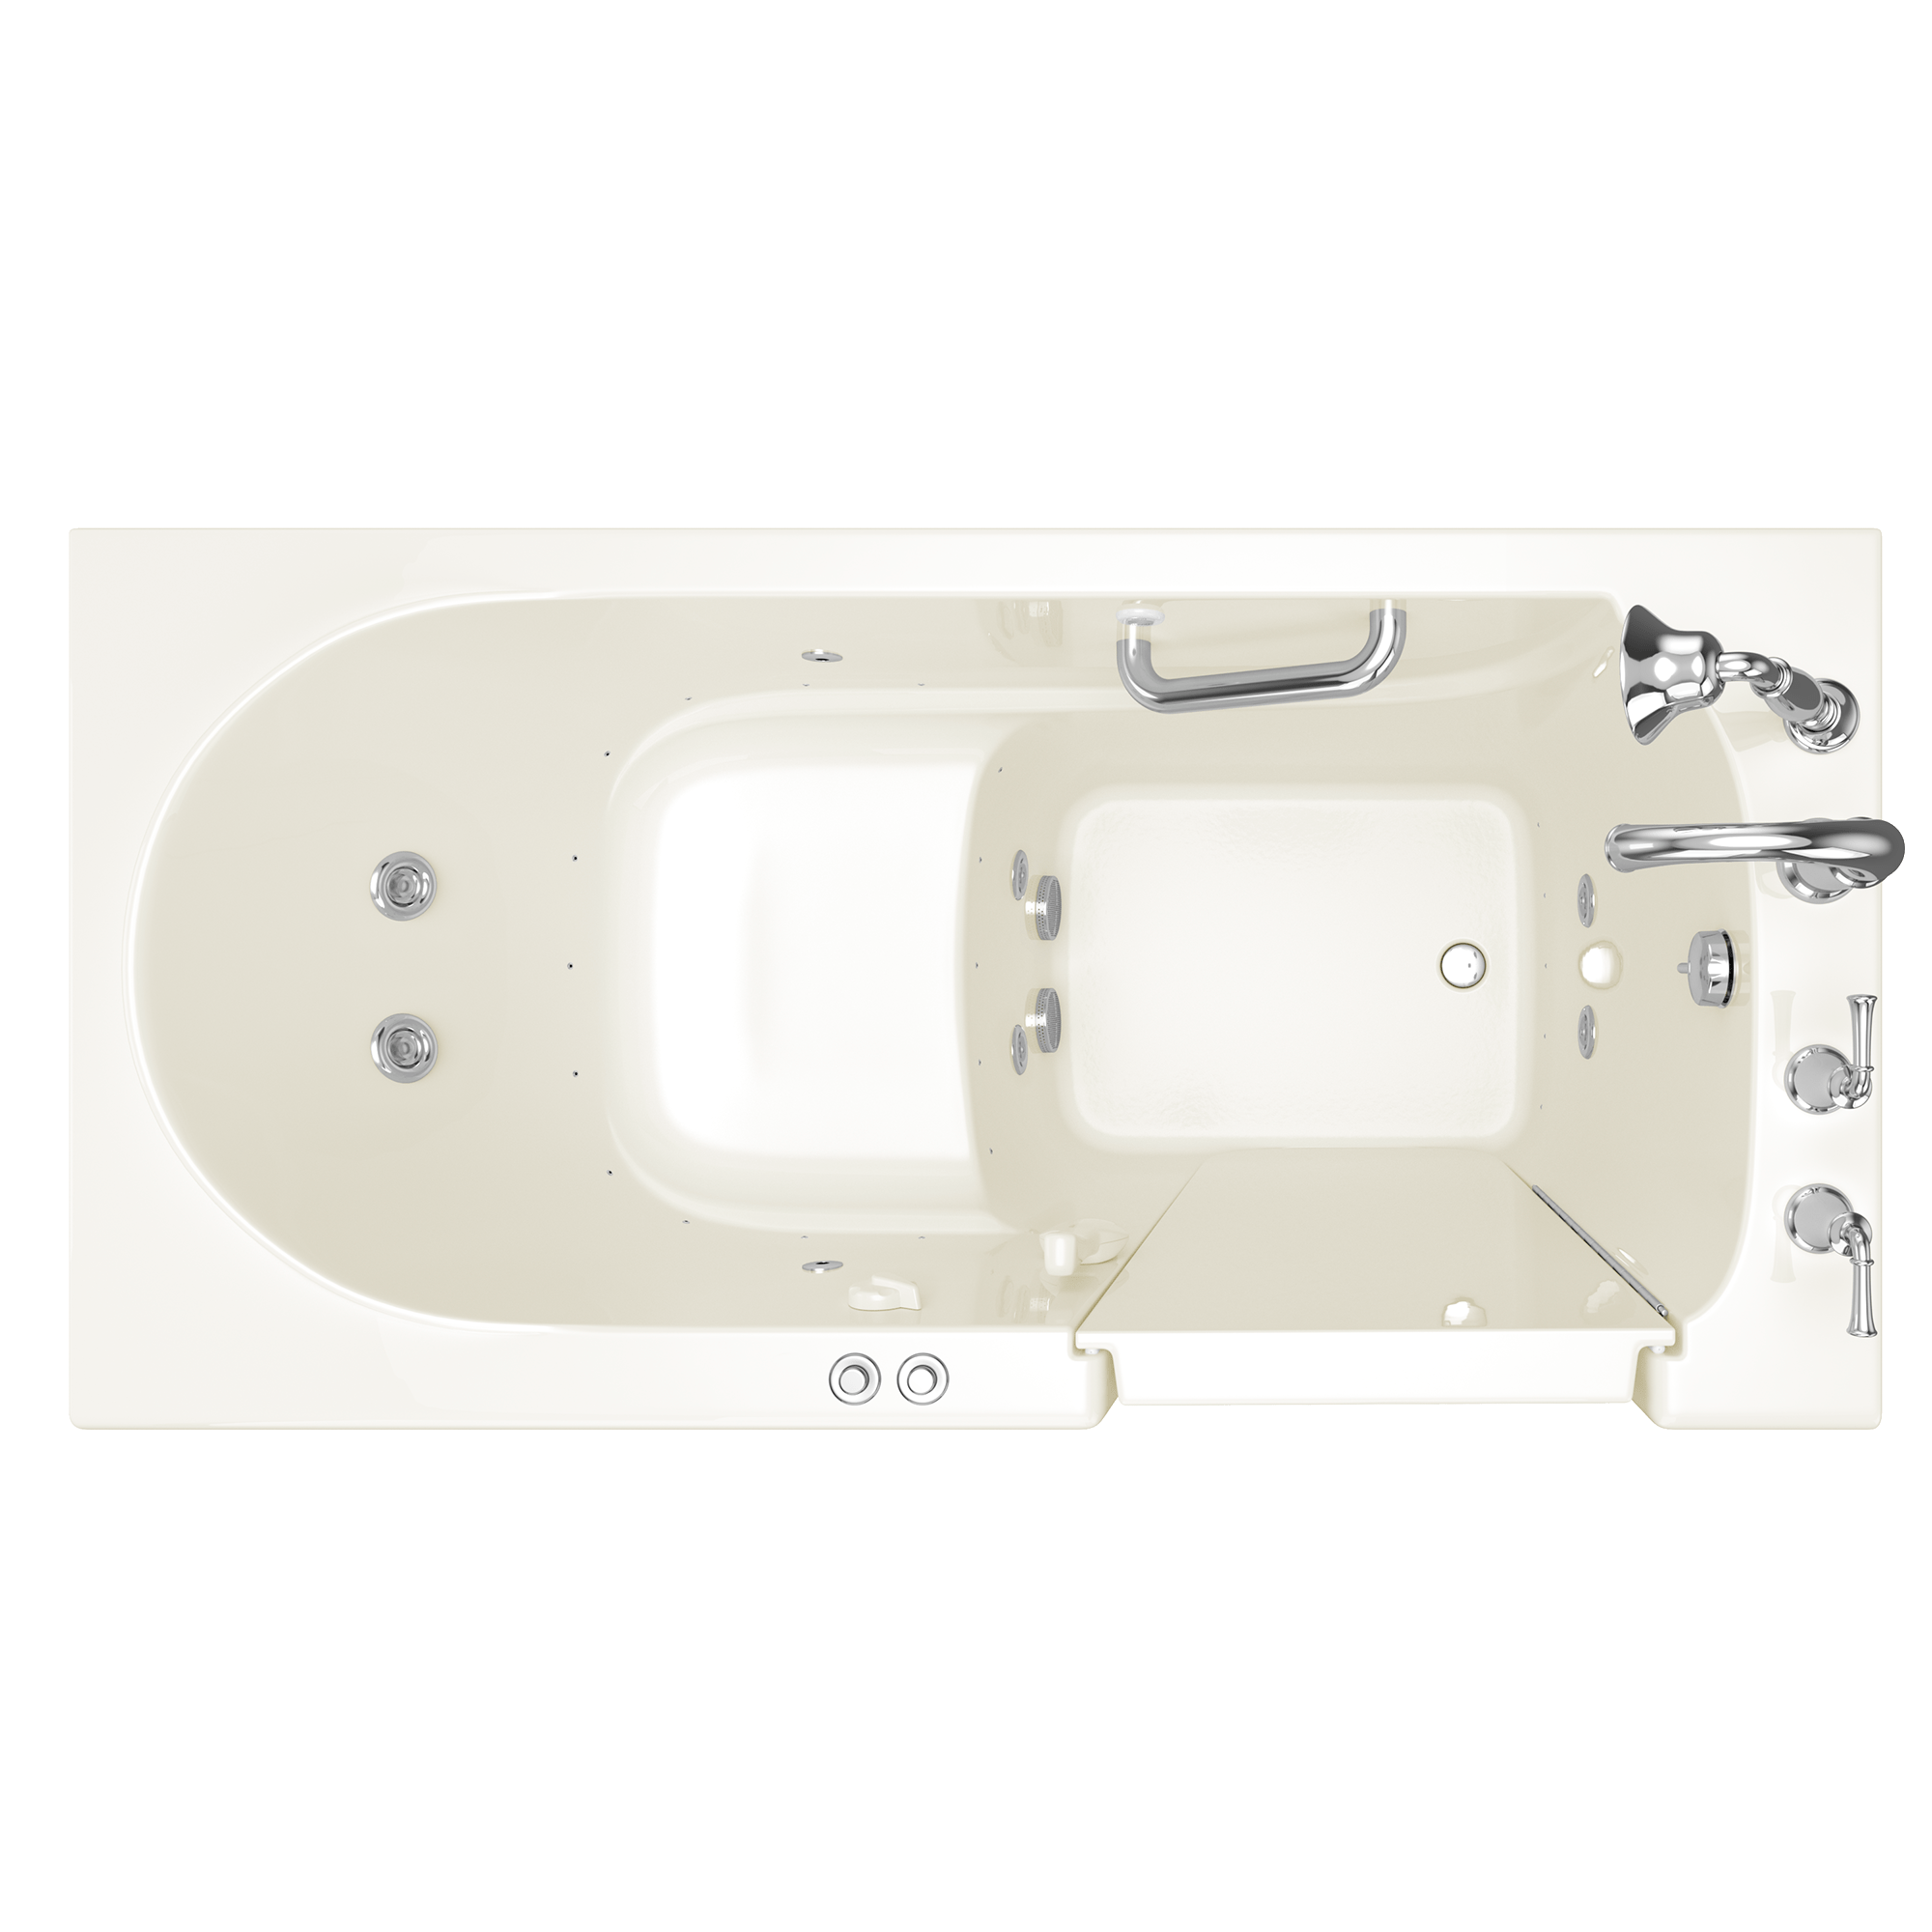 Gelcoat Value Series 60x30-Inch Walk-In Bathtub with Combination Whirlpool and Air Spa System - Right Hand Door and Drain